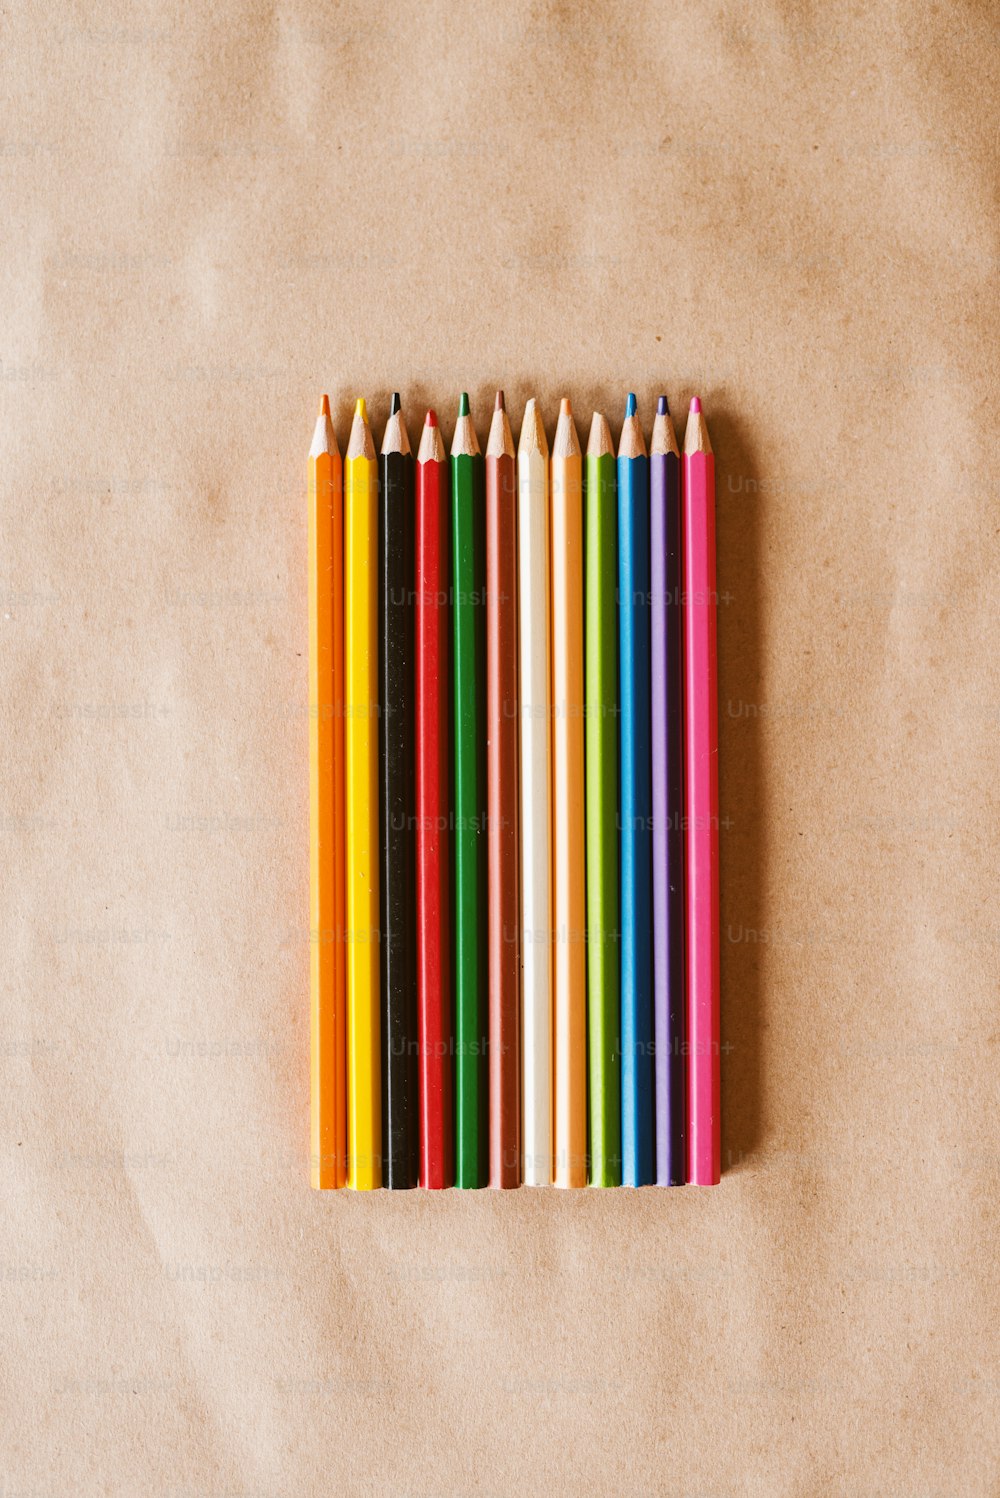 Row of colourful wooden crayons on the desk.